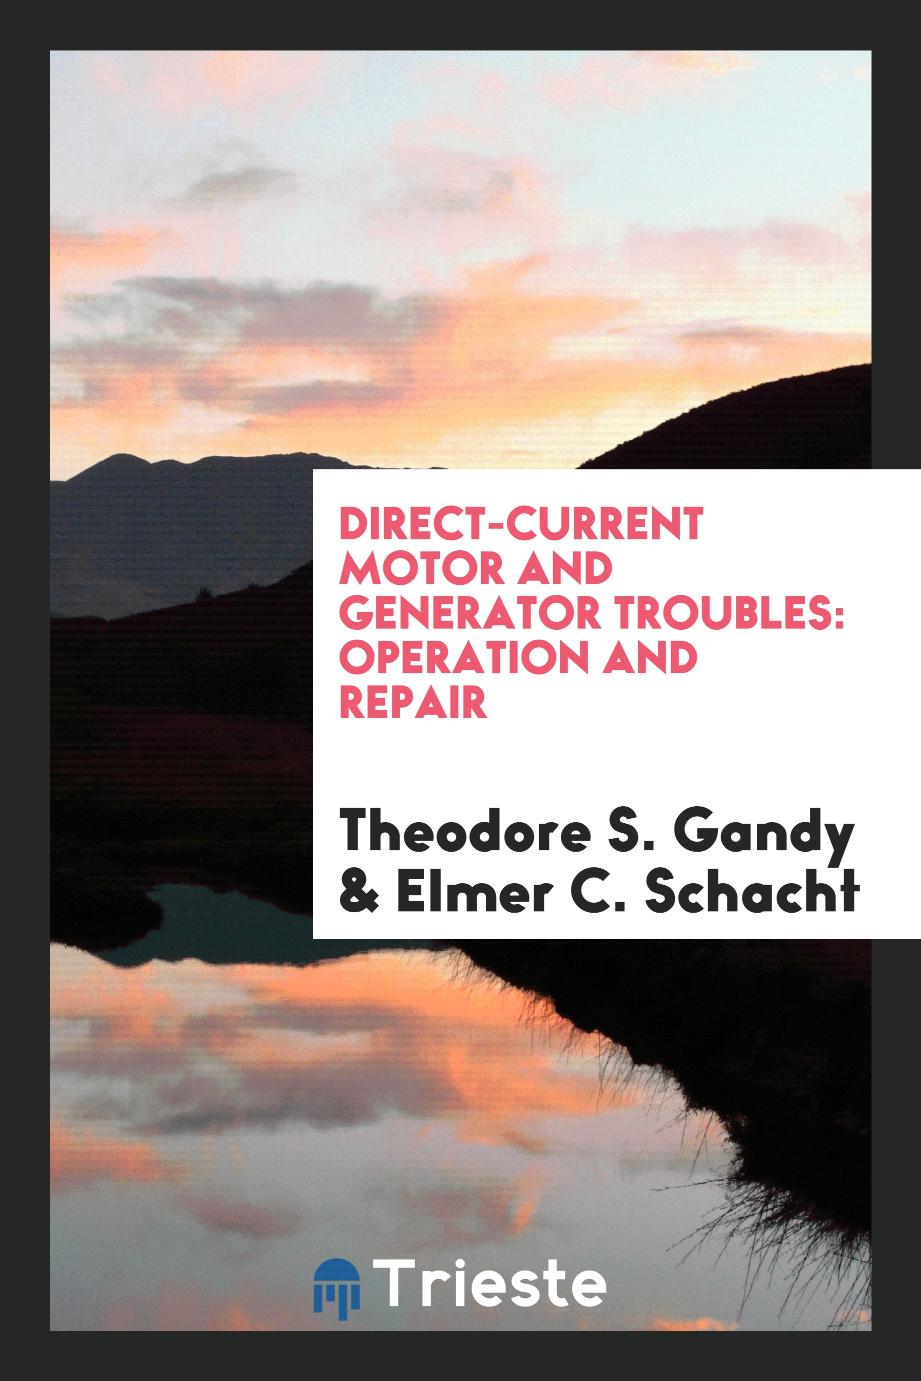 Theodore S. Gandy, Elmer C. Schacht - Direct-Current Motor and Generator Troubles: Operation and Repair